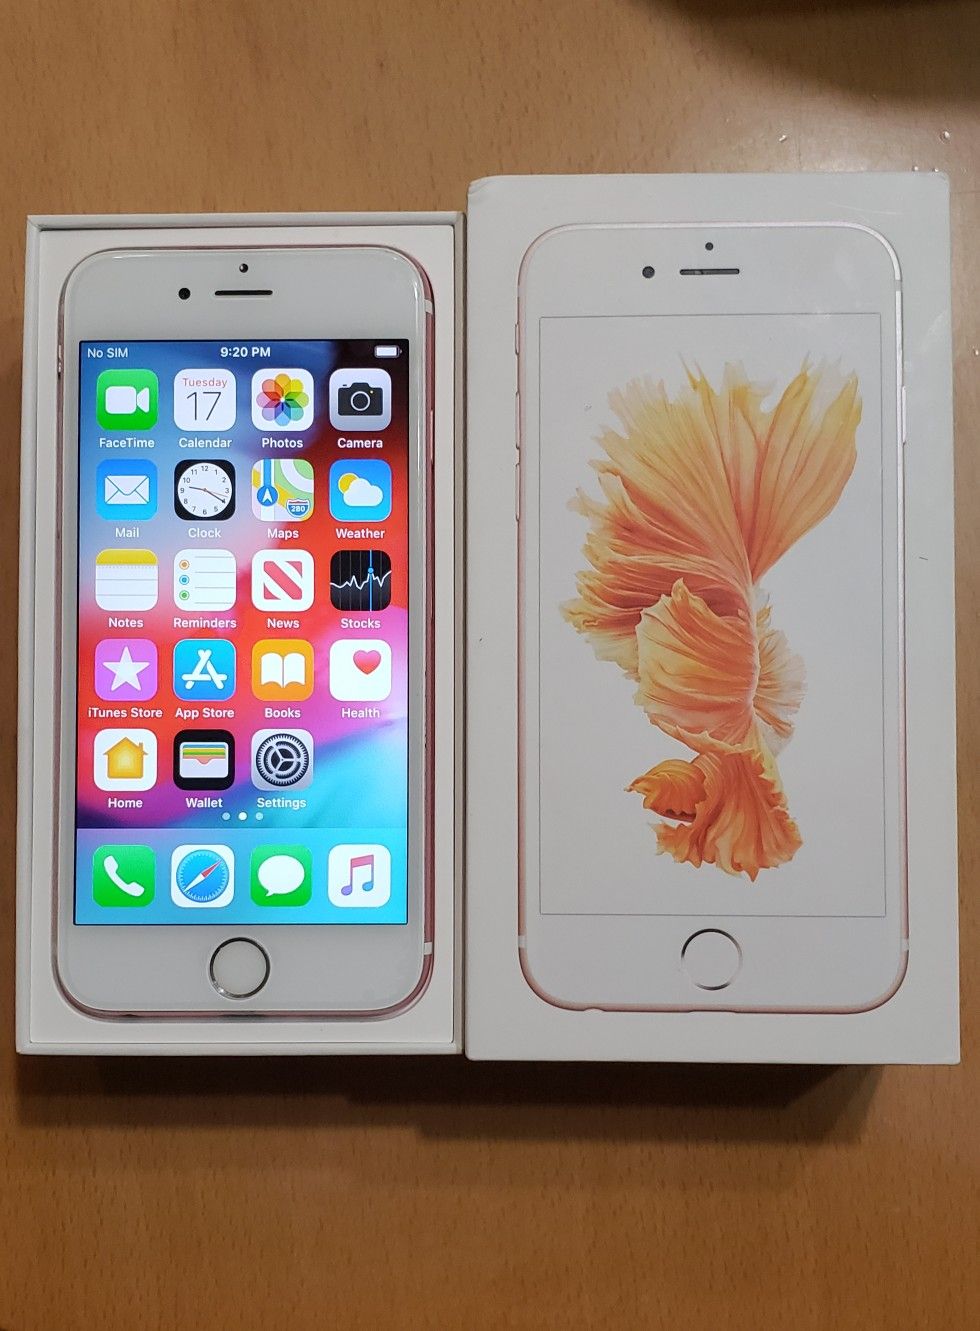 Iphone 6s, gold rose, 64 gb. Unlock for any carrier, work perfect, mint condition.